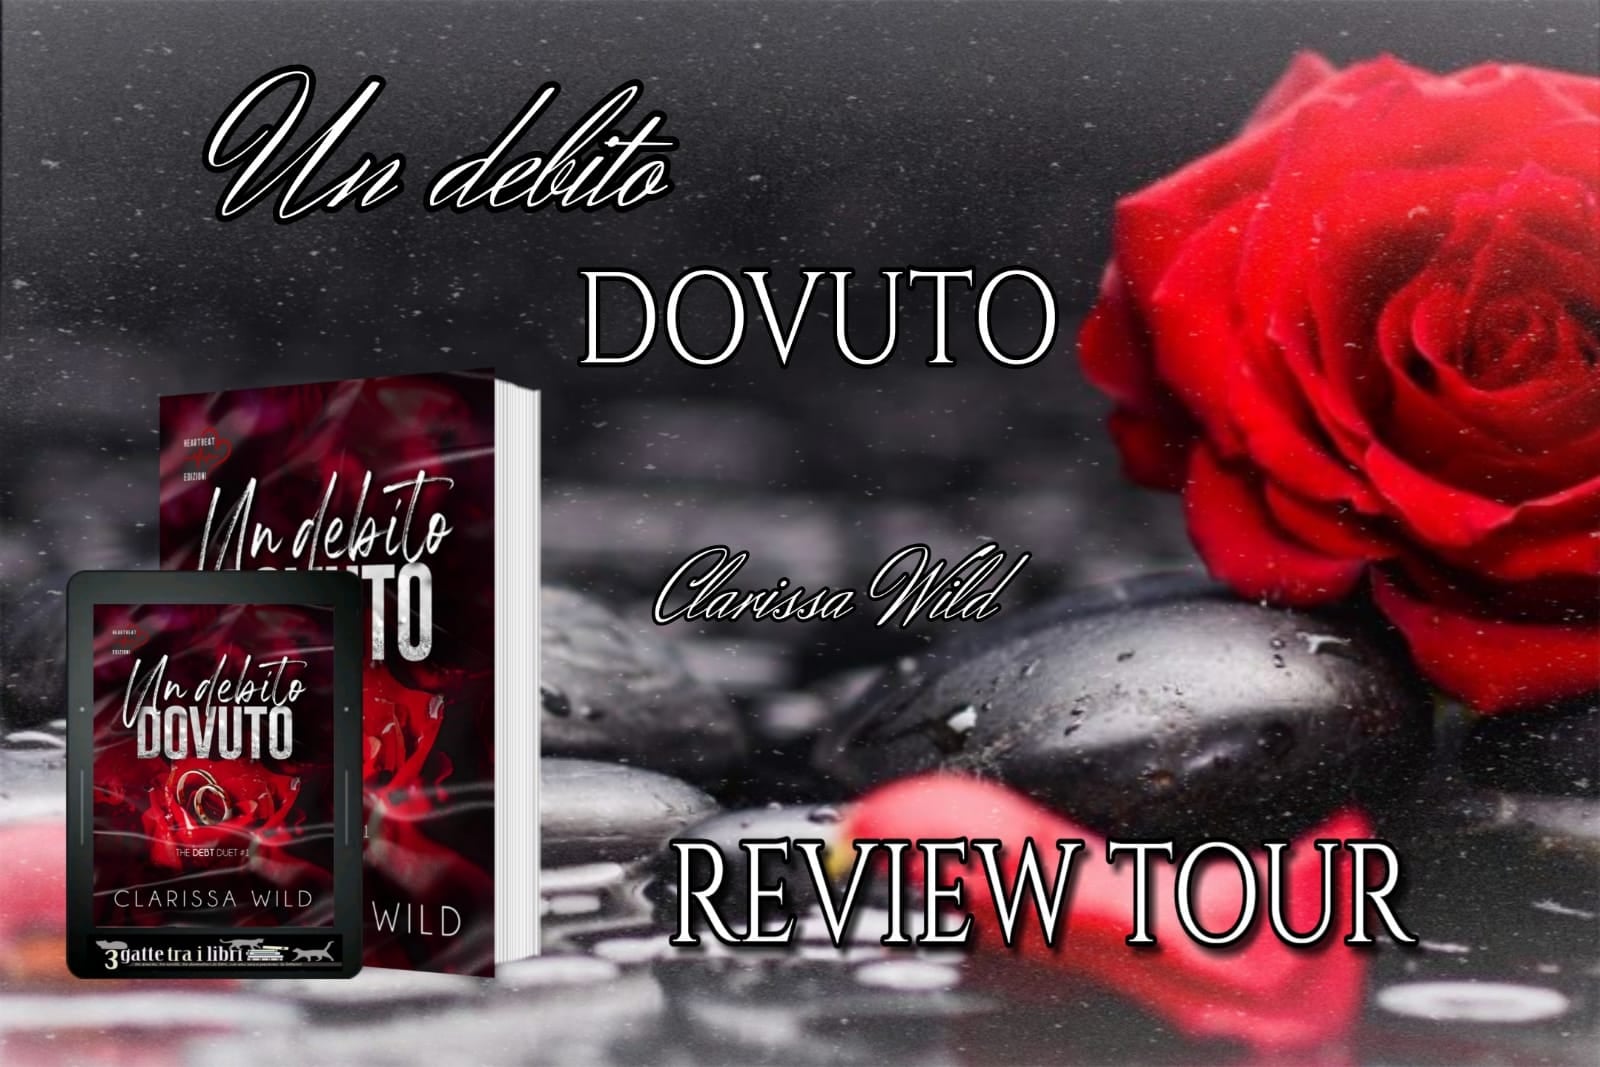 “A touch of darkness” di Scarlett St Claire